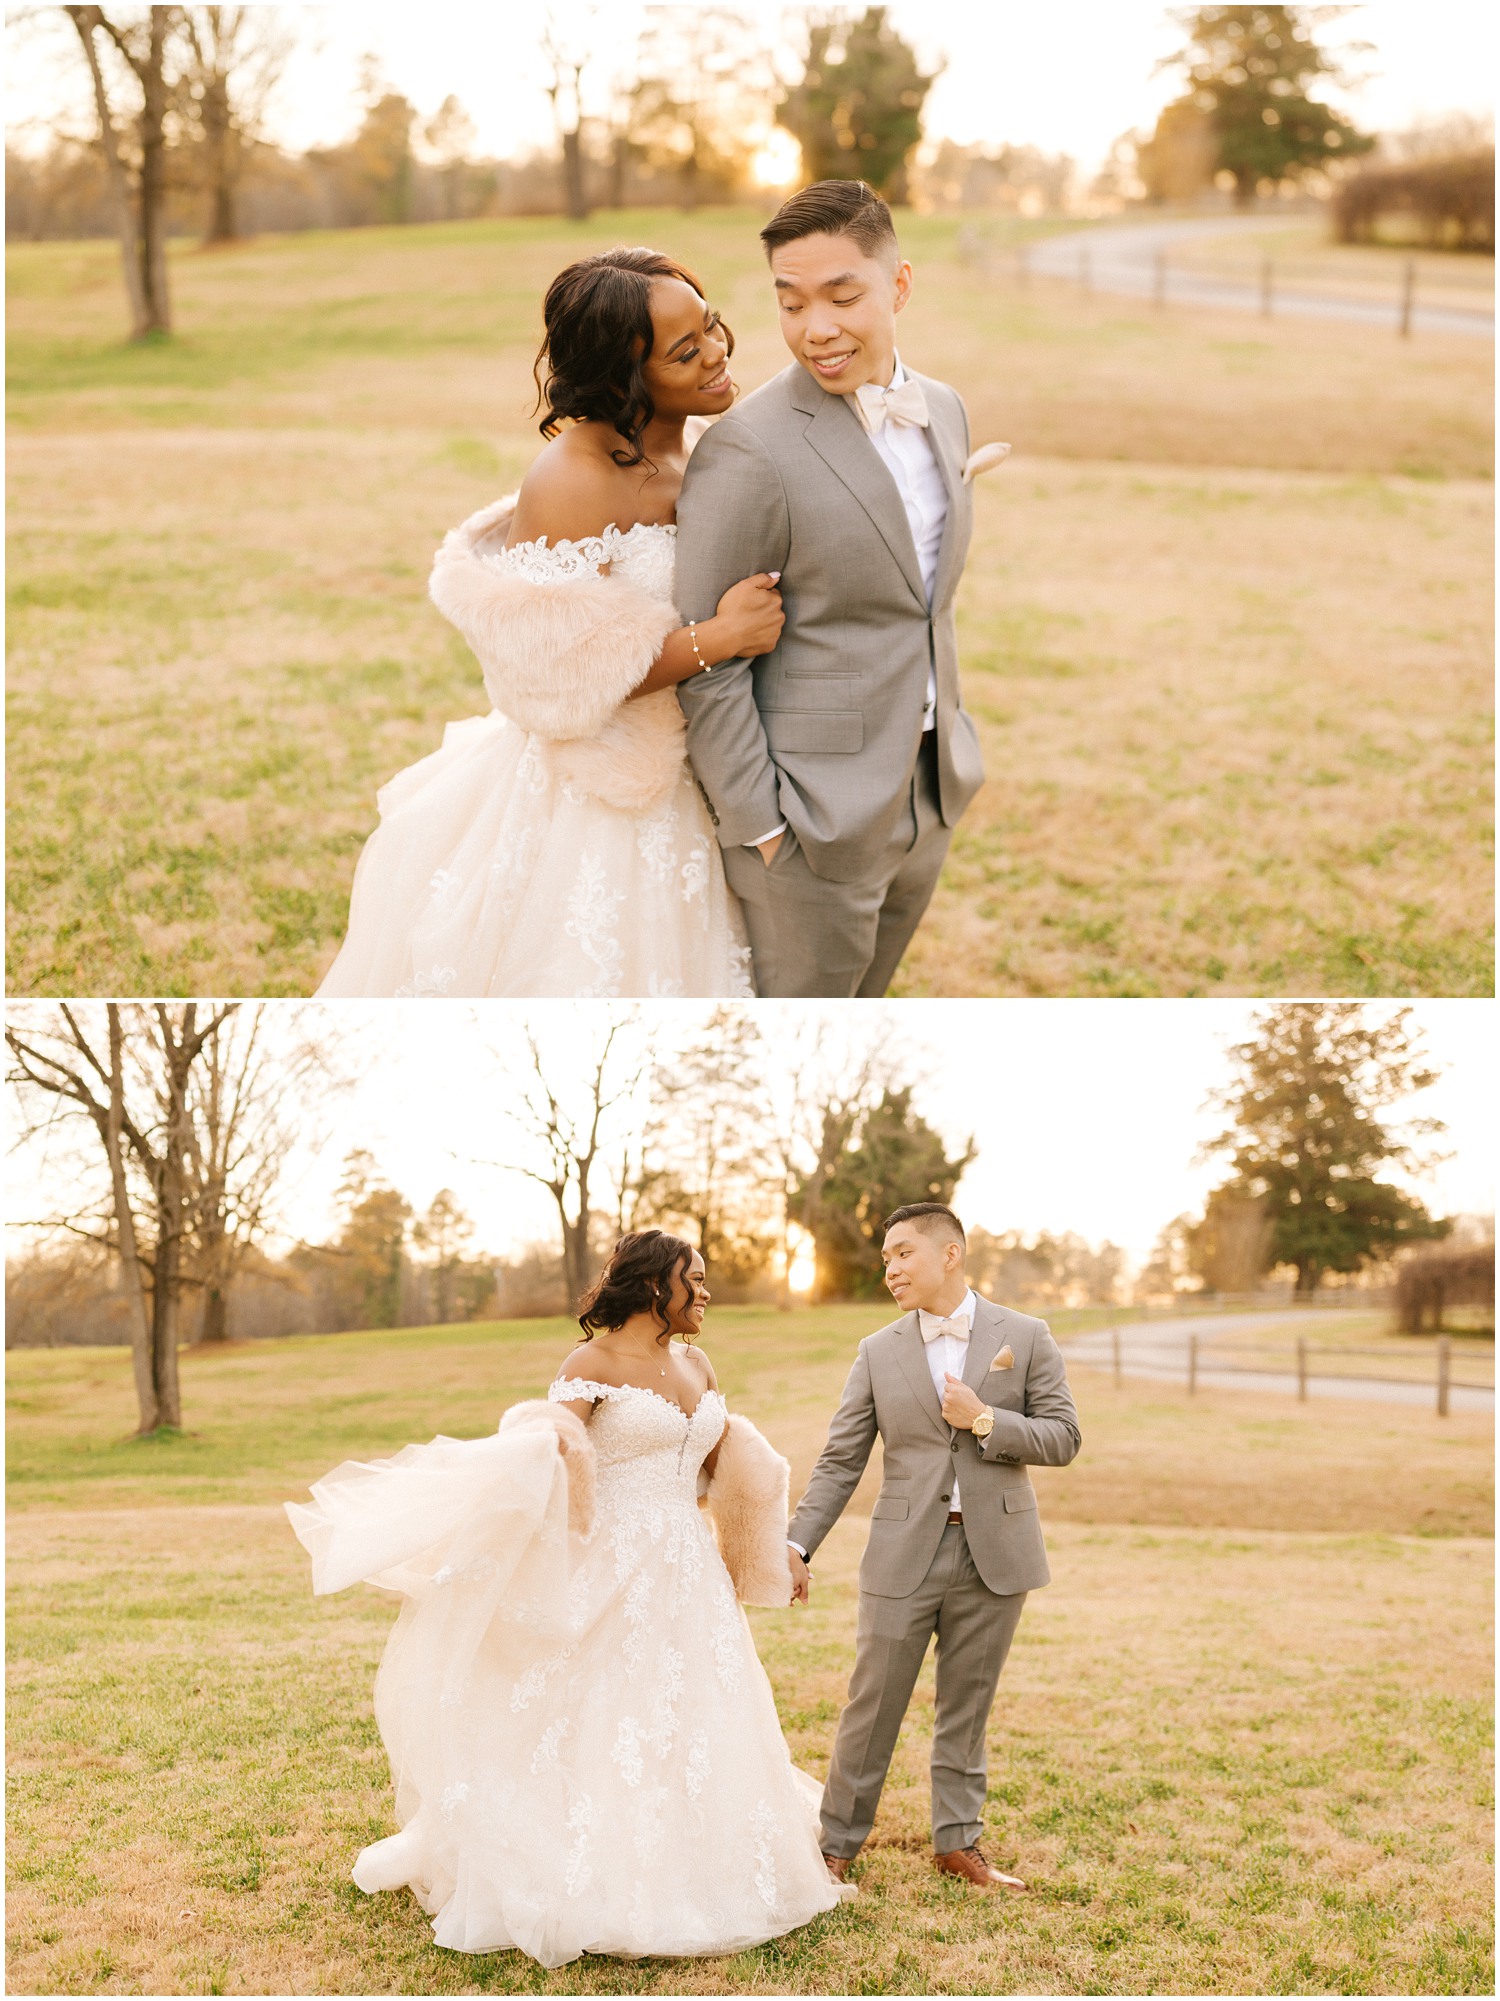 Candid moment of a couple on their wedding day in Raleigh, NC.